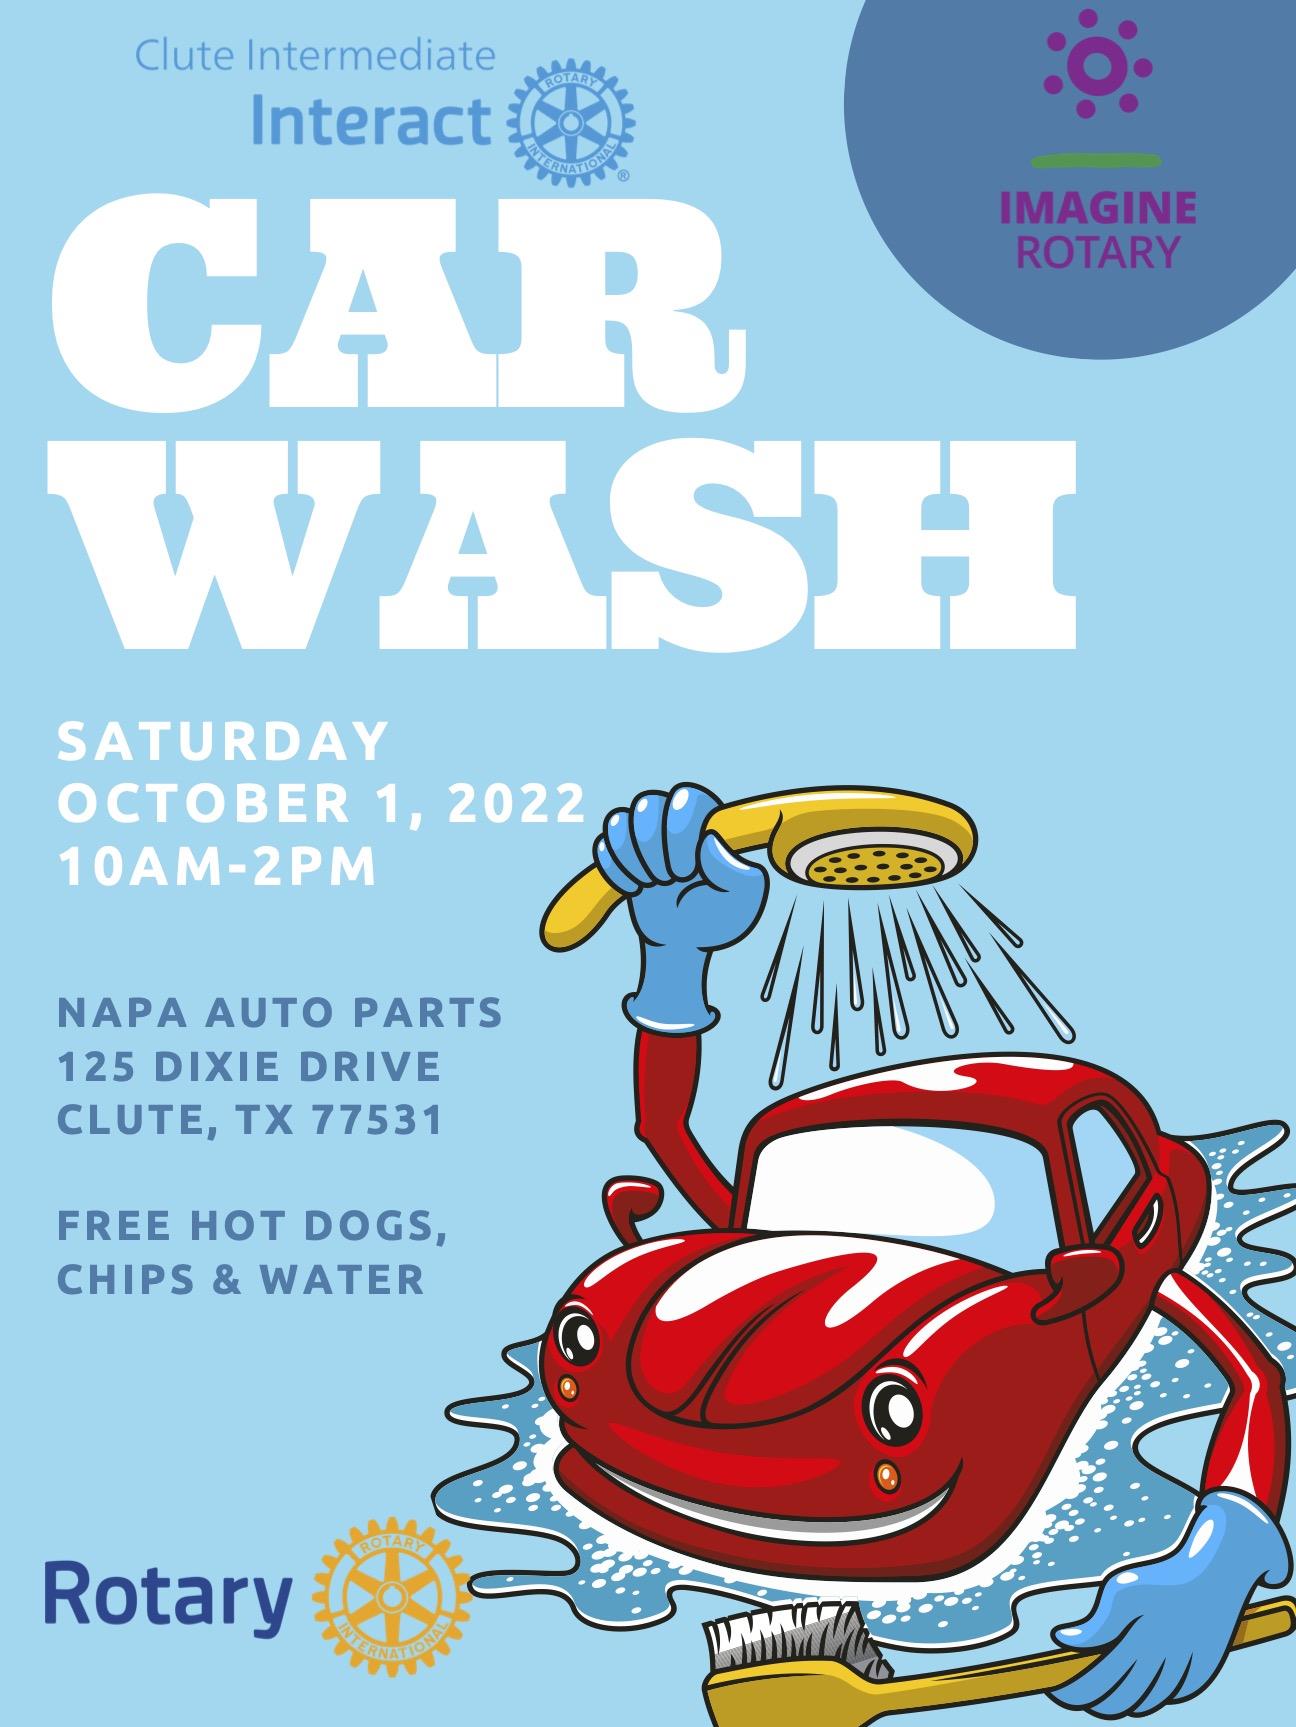 Clute Intermediate Interact will turn your dirty car into a clean one Saturday October 1, 2022 at Napa Auto Parts on Dixie Drive in Clute, TX. 